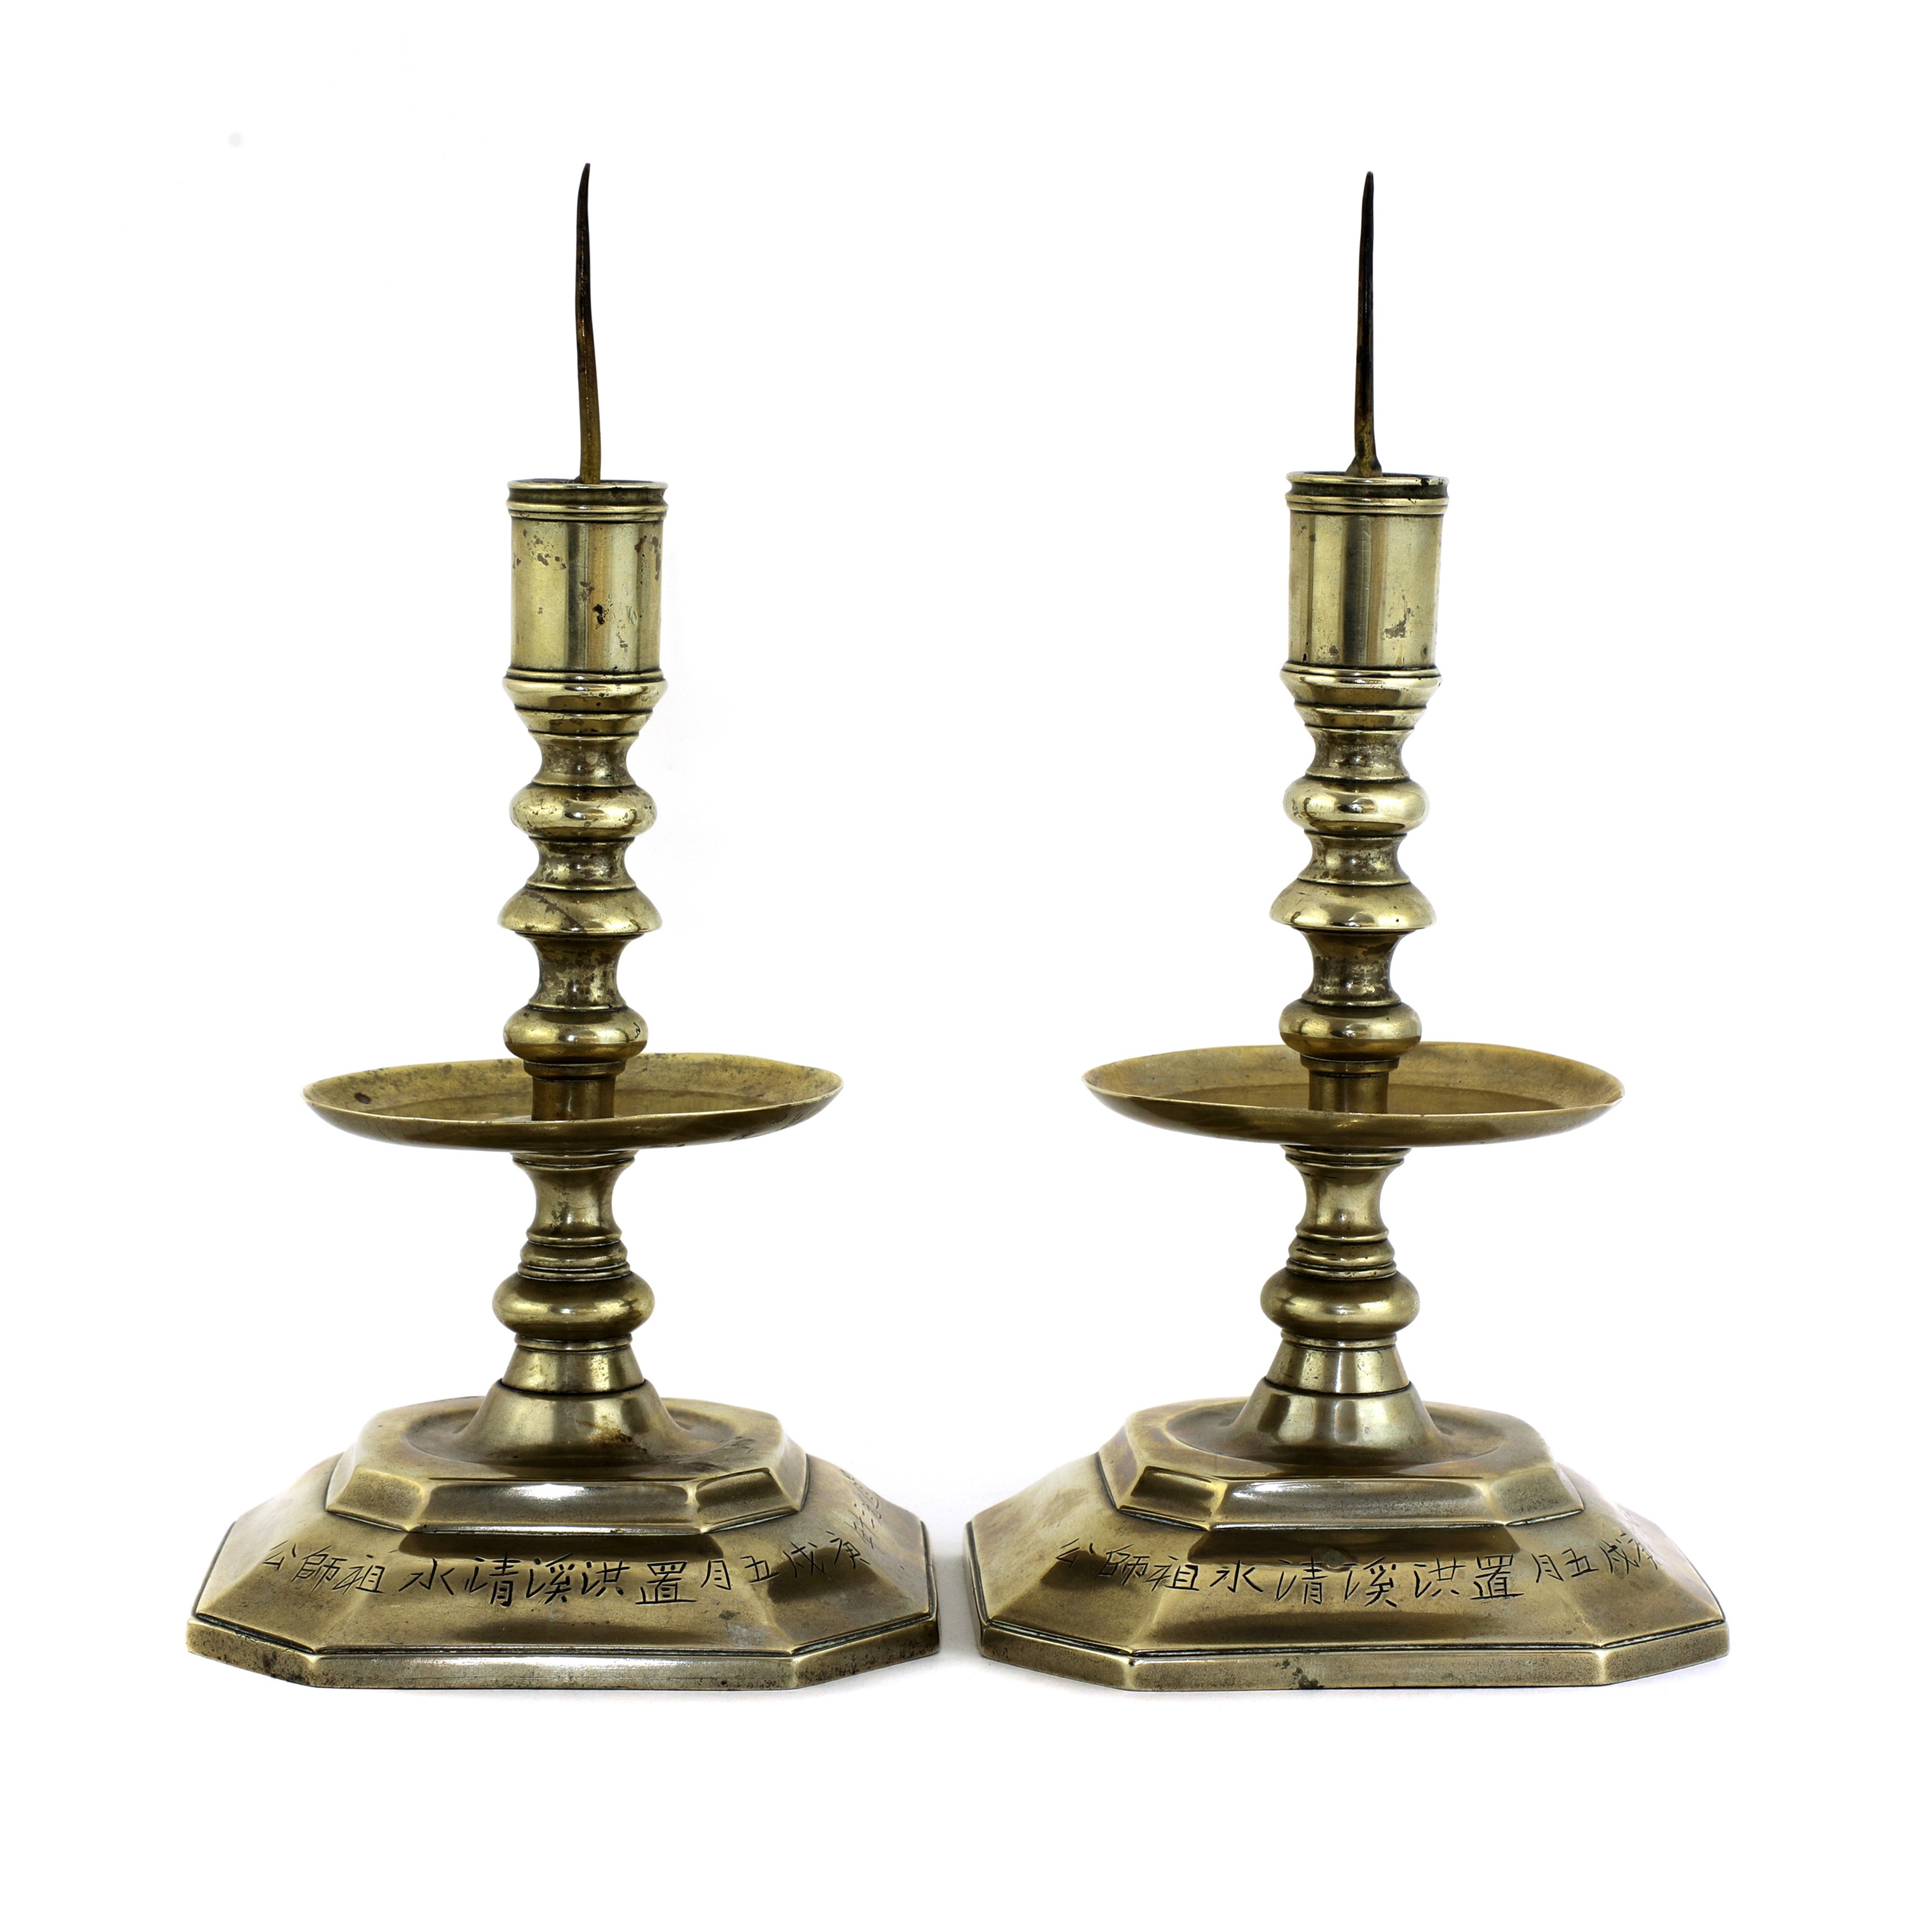 A pair of Chinese Paktong pricket candlesticks, 17th century